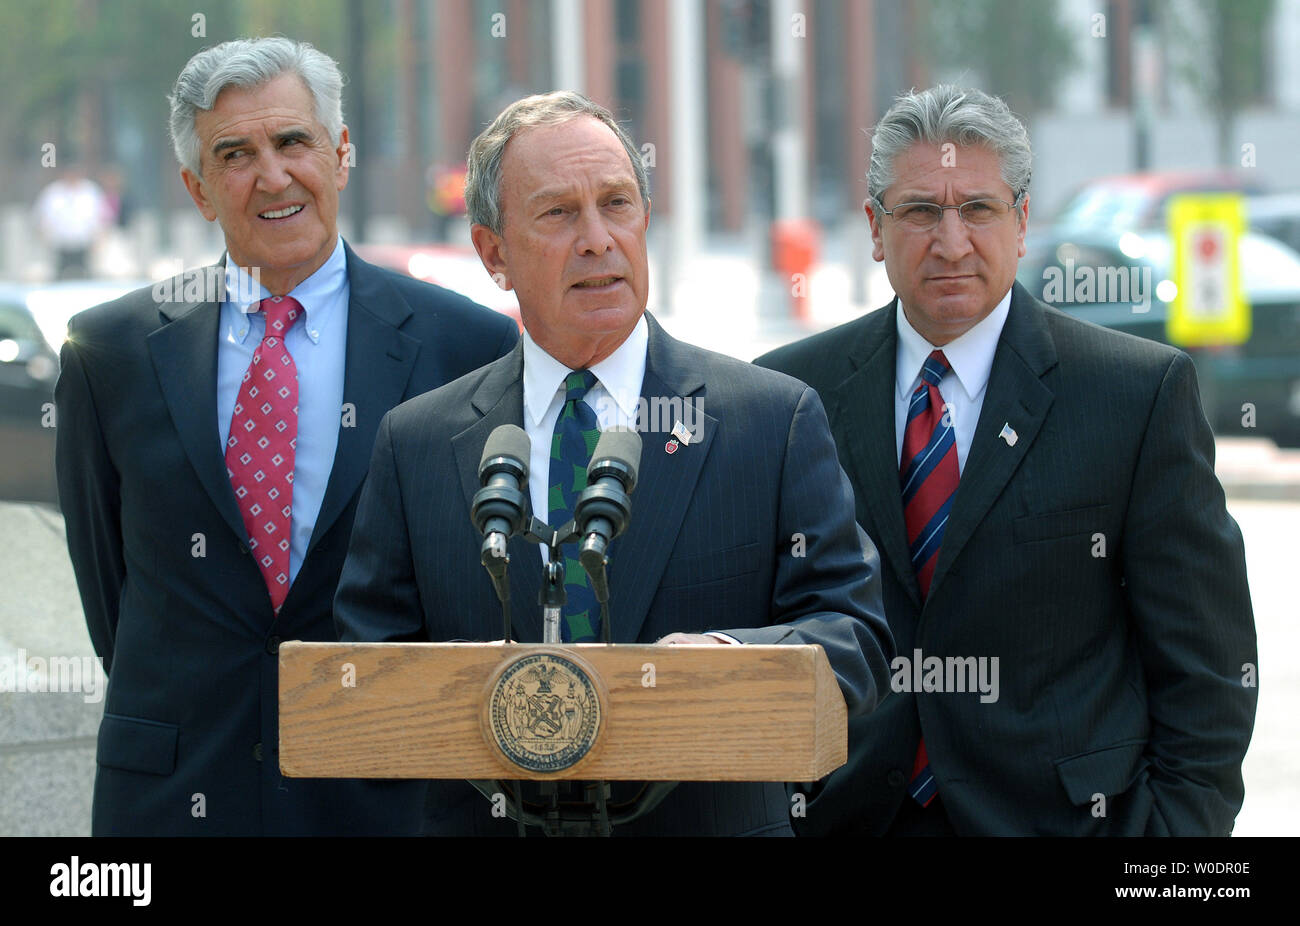 Republican New York State Senate Majority Leader Joseph L. Bruno, New York City Mayor Michael Bloomberg and Democratic New York State Assembly Minority Leader James Tedisco (L to R) discuss their meeting with U.S. Department of Transportation in Washington on July 10, 2007. Bloomberg is pushing for federal money to create toll zones for congested areas of New York City.    (UPI Photo/Roger L. Wollenberg) Stock Photo